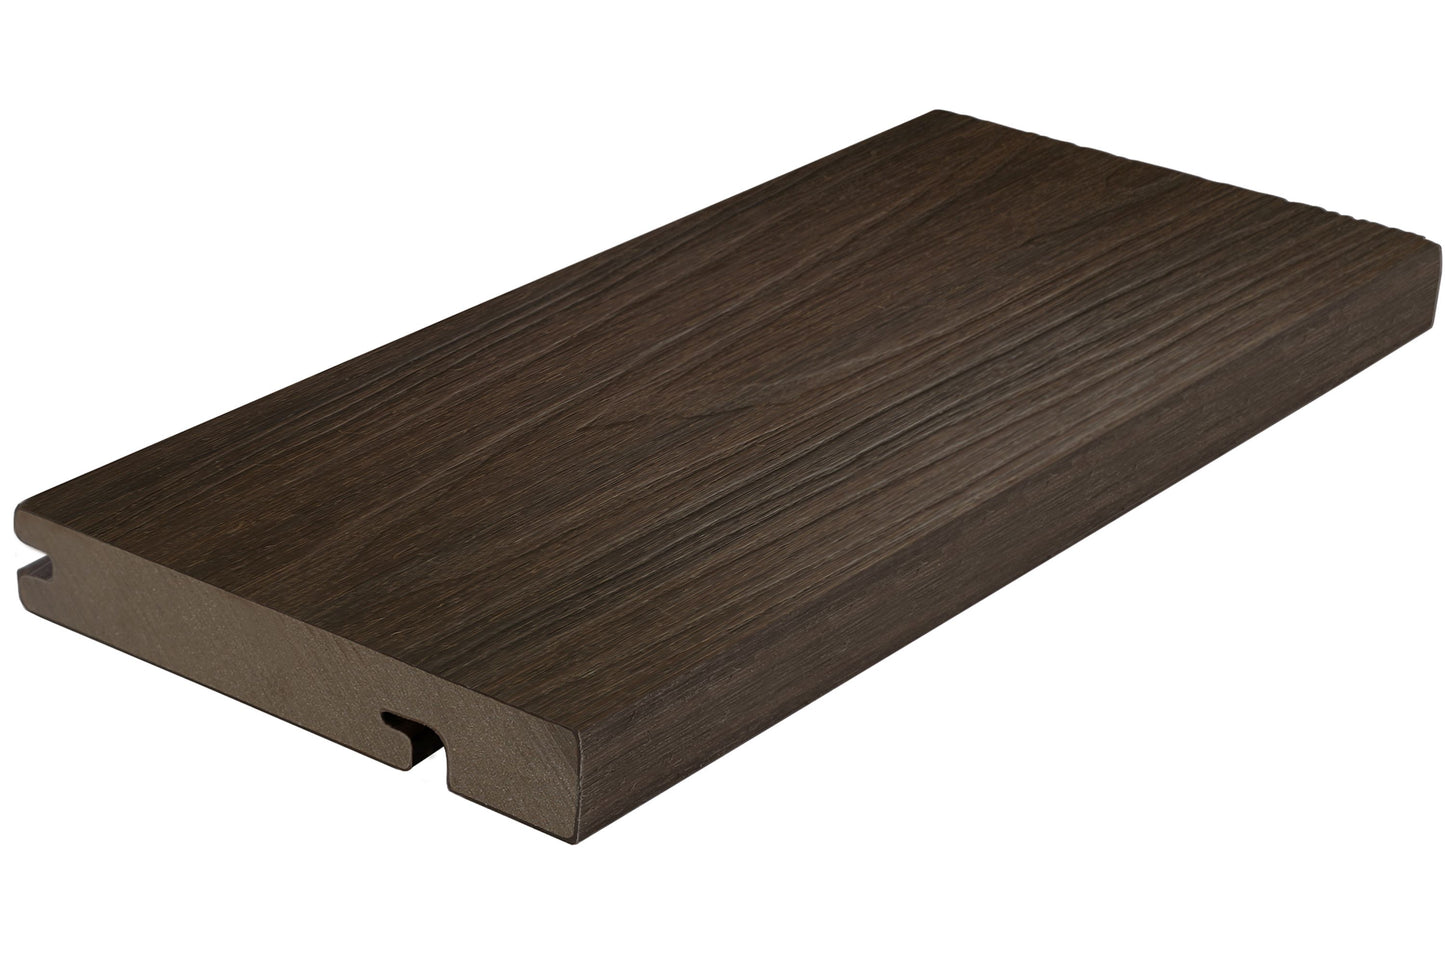 Ultrashield Naturale Capped Bullnose Composite Decking Board - Walnut 3600mm x 138mm x 23mm - Composite Decking Company